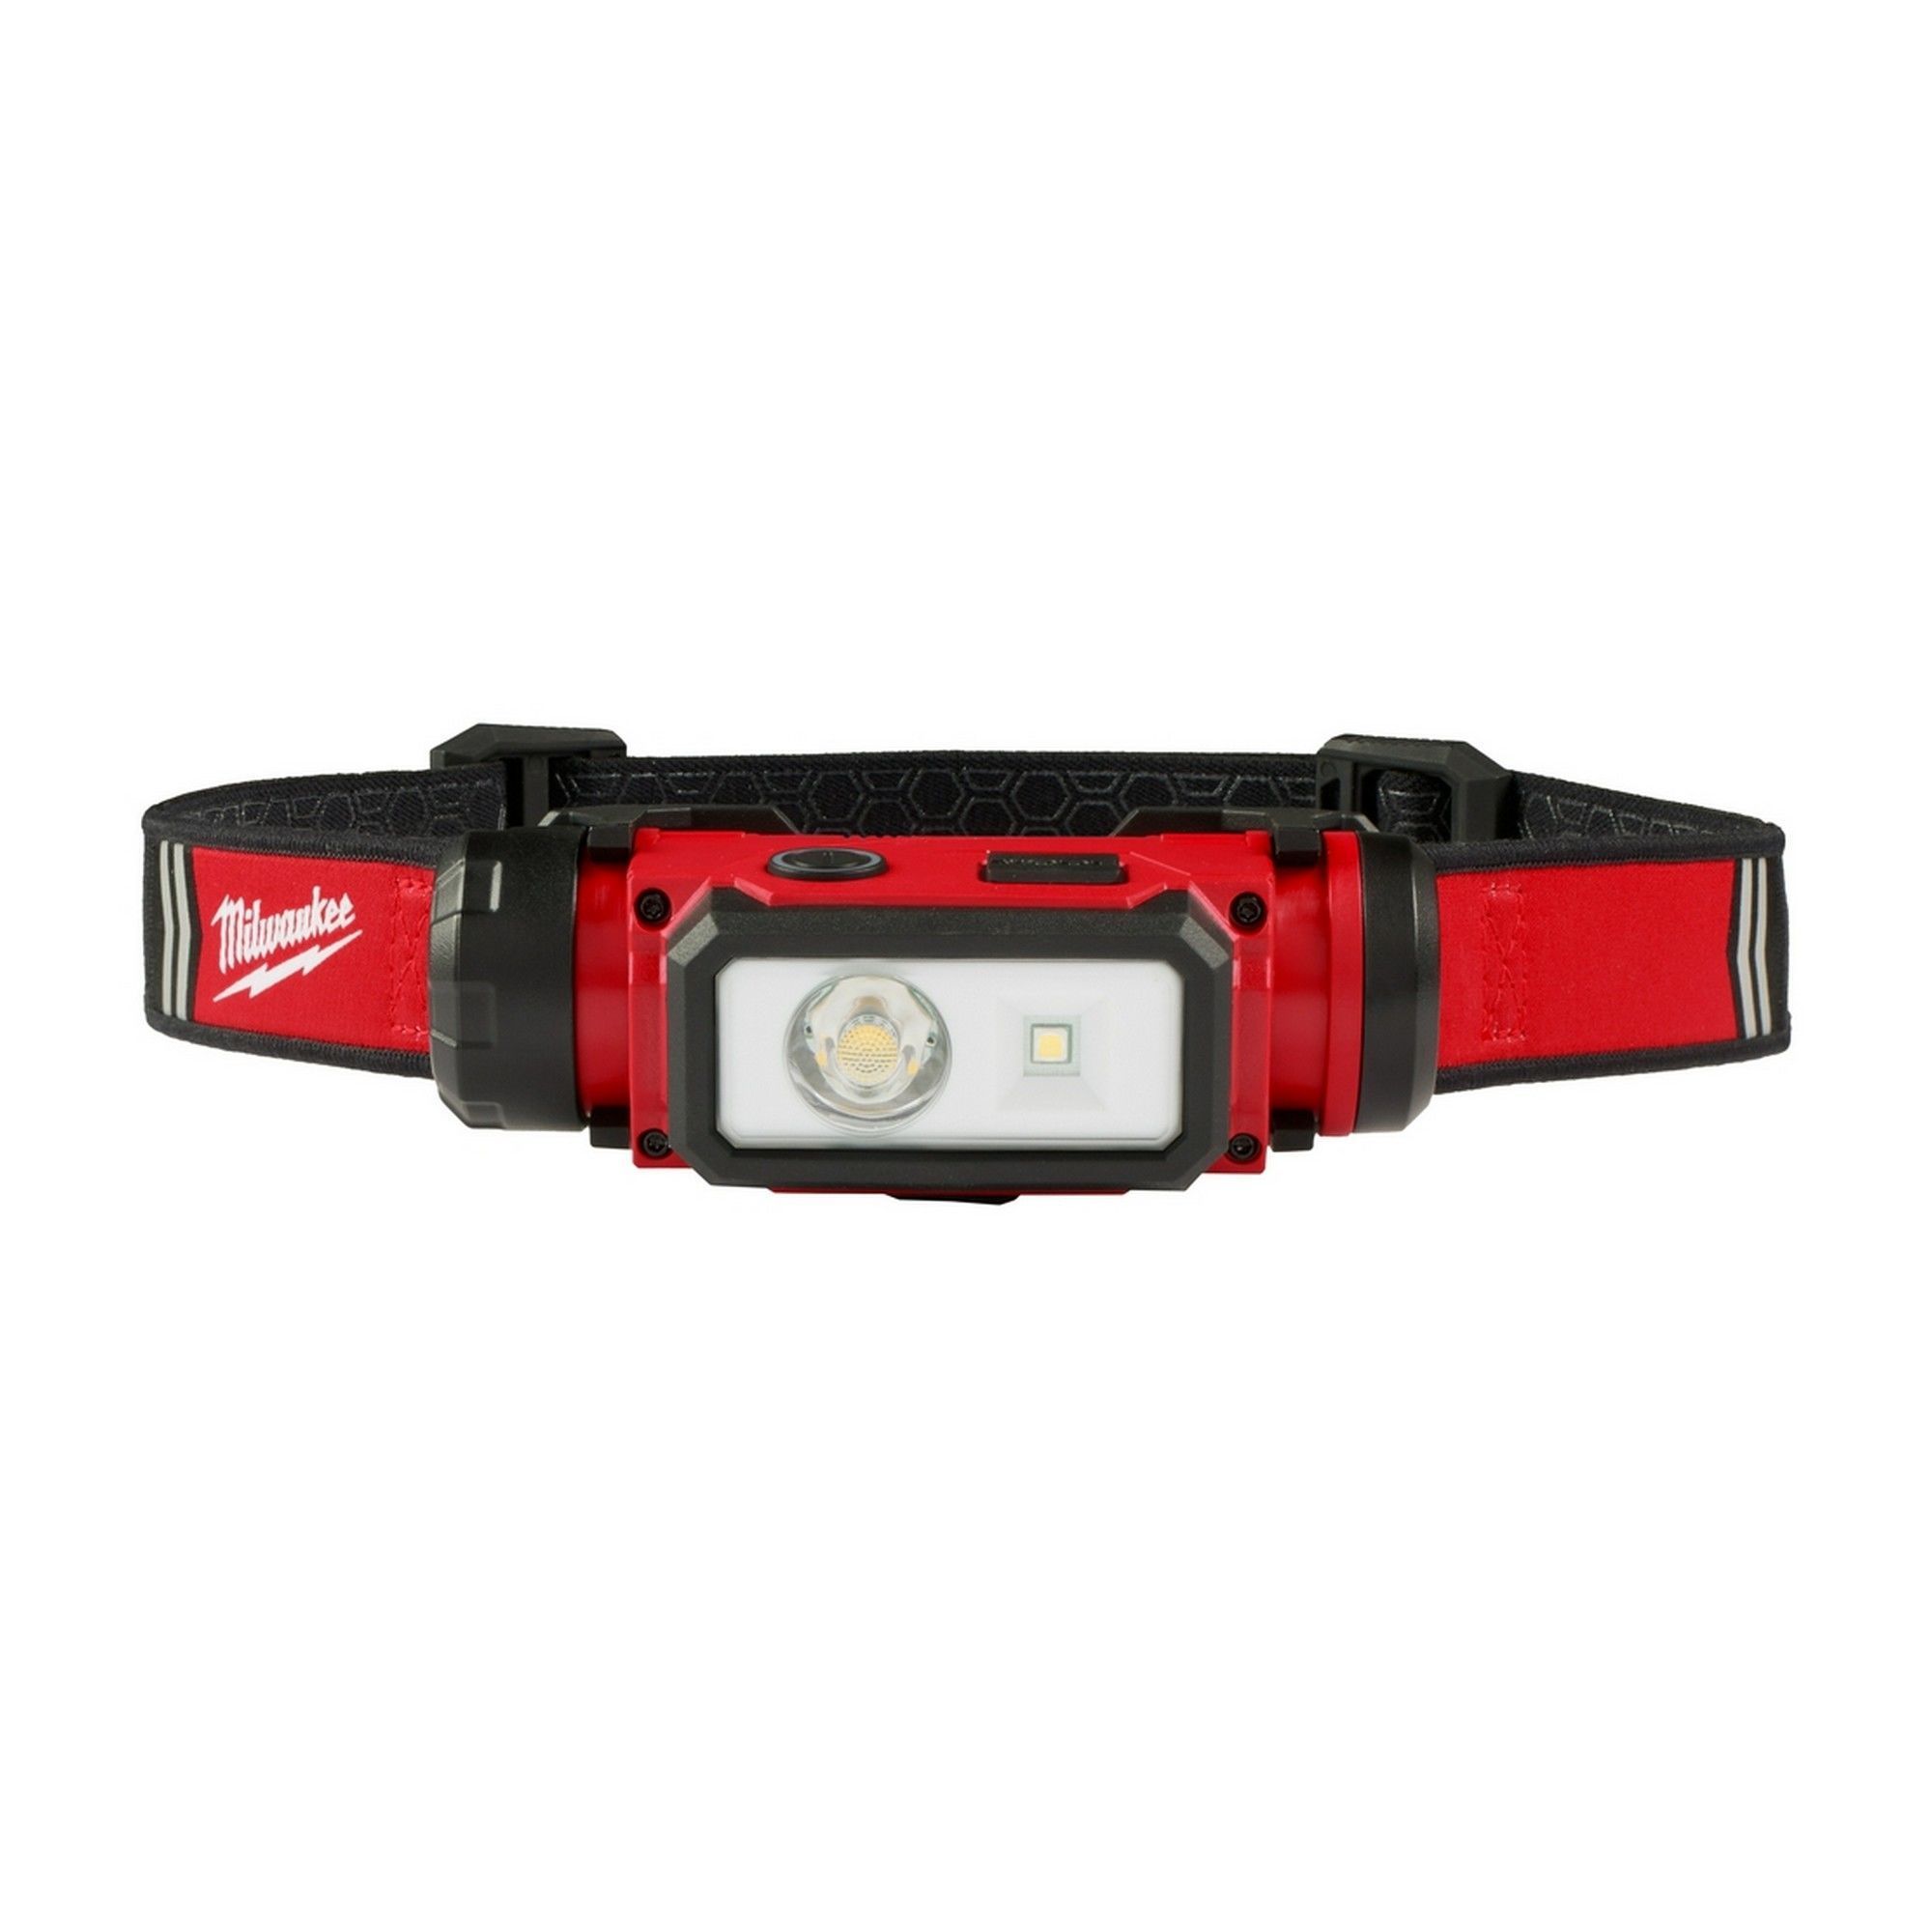 USB Rechargeable Hard Hat Headlamp 600 Lumens from MILWAUKEE BMR